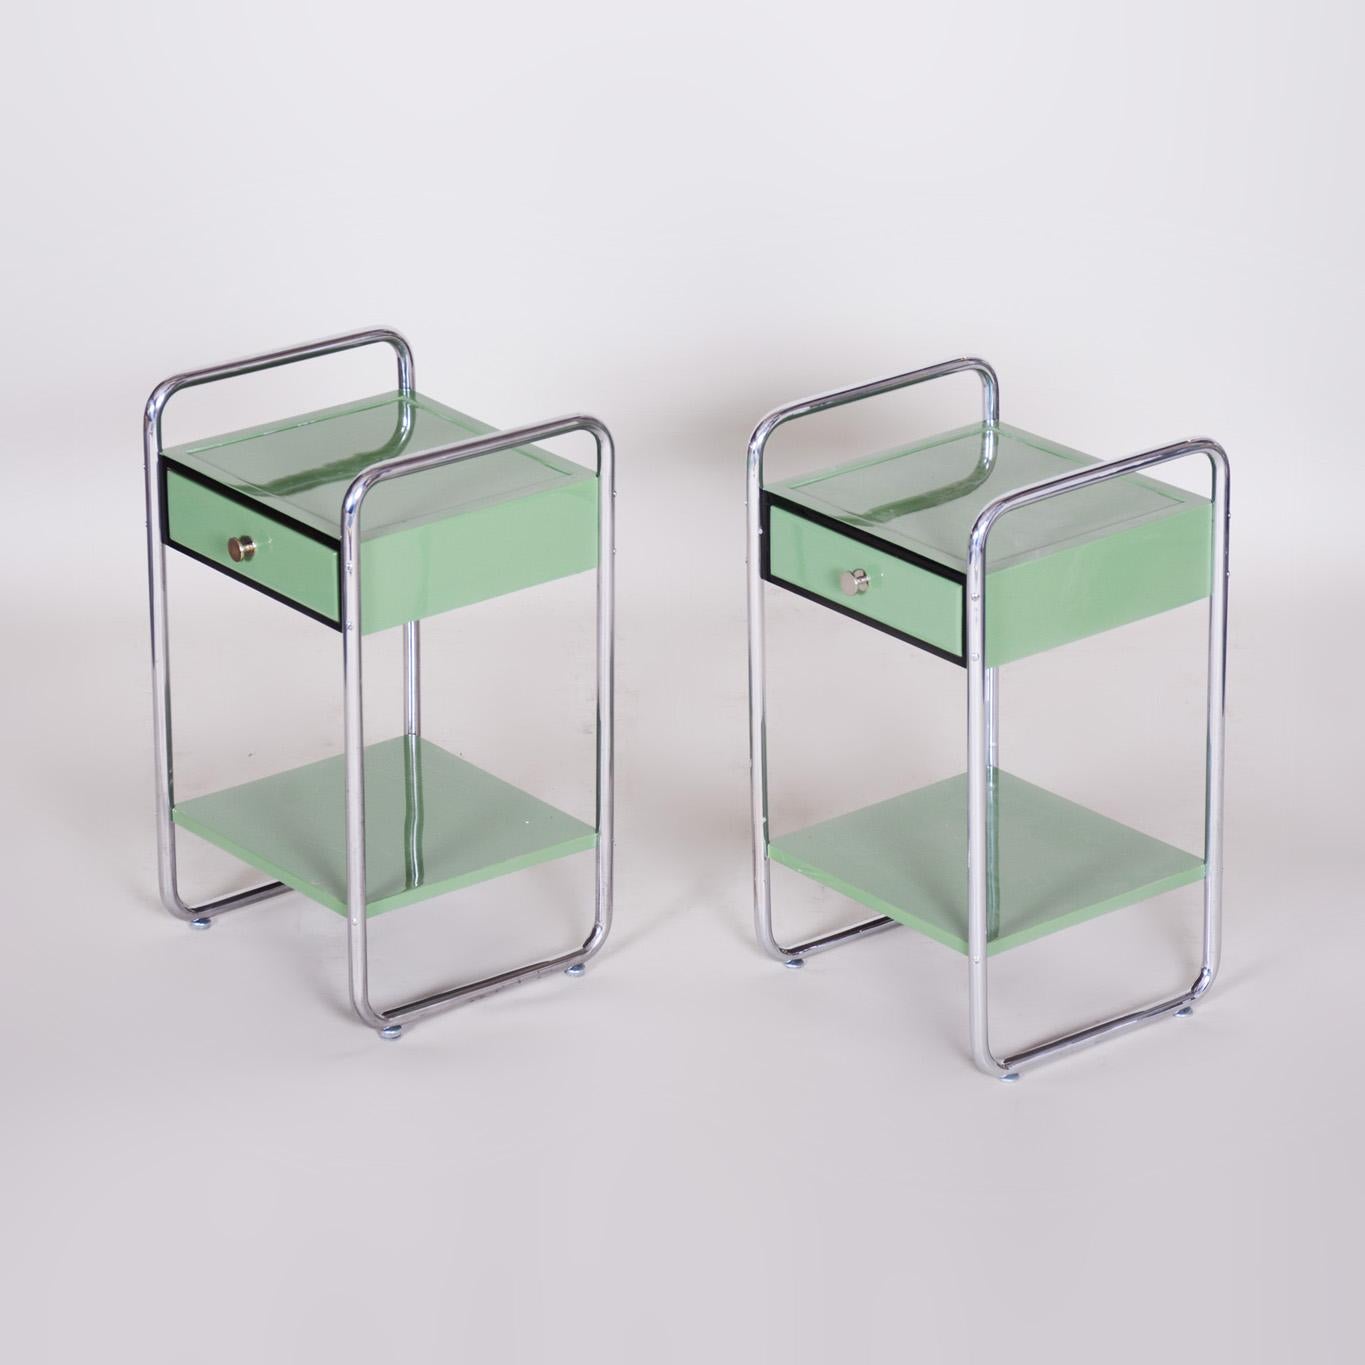 Restored Bauhaus Pair of Bed-Side Tables, Chrome-Plated Steel, Czech, 1930s For Sale 1